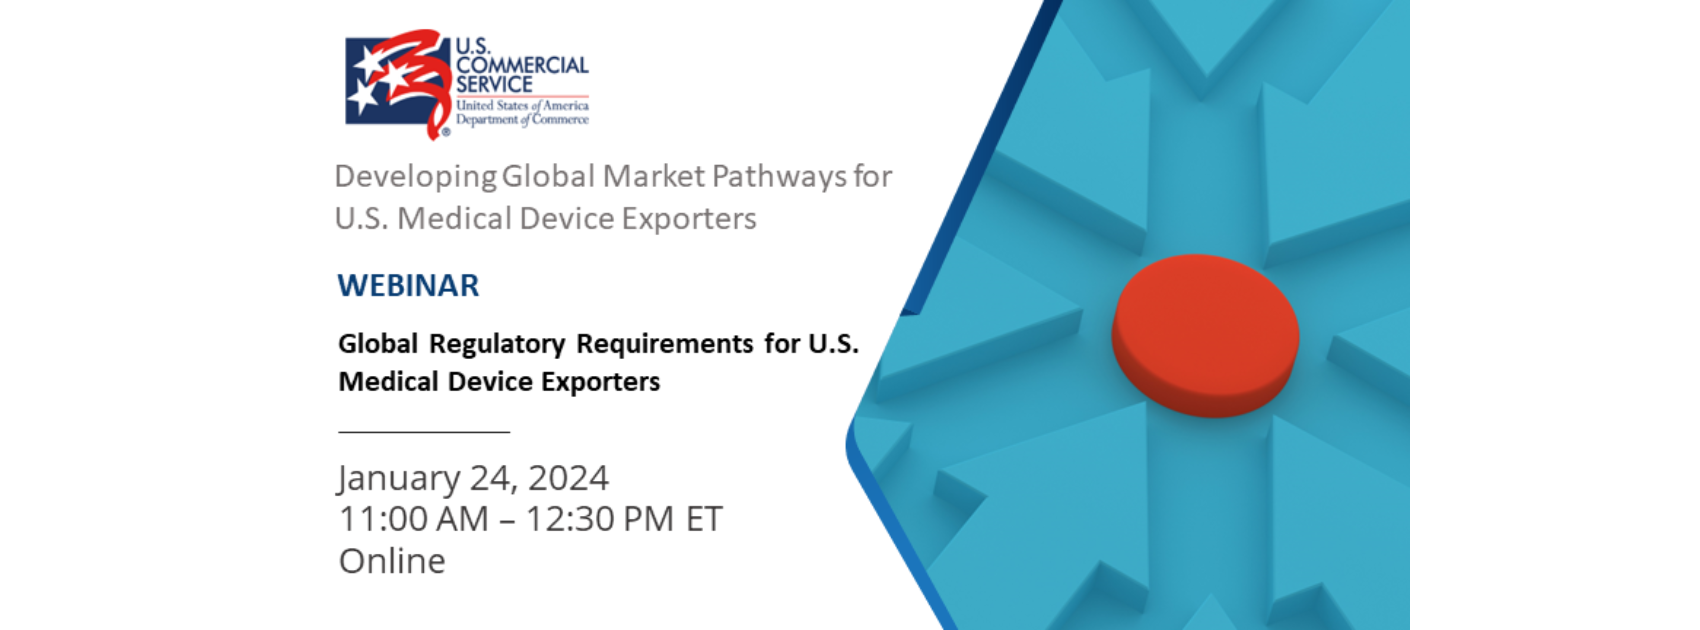 Global Regulatory Requirements for U.S. Medical Device Exporters